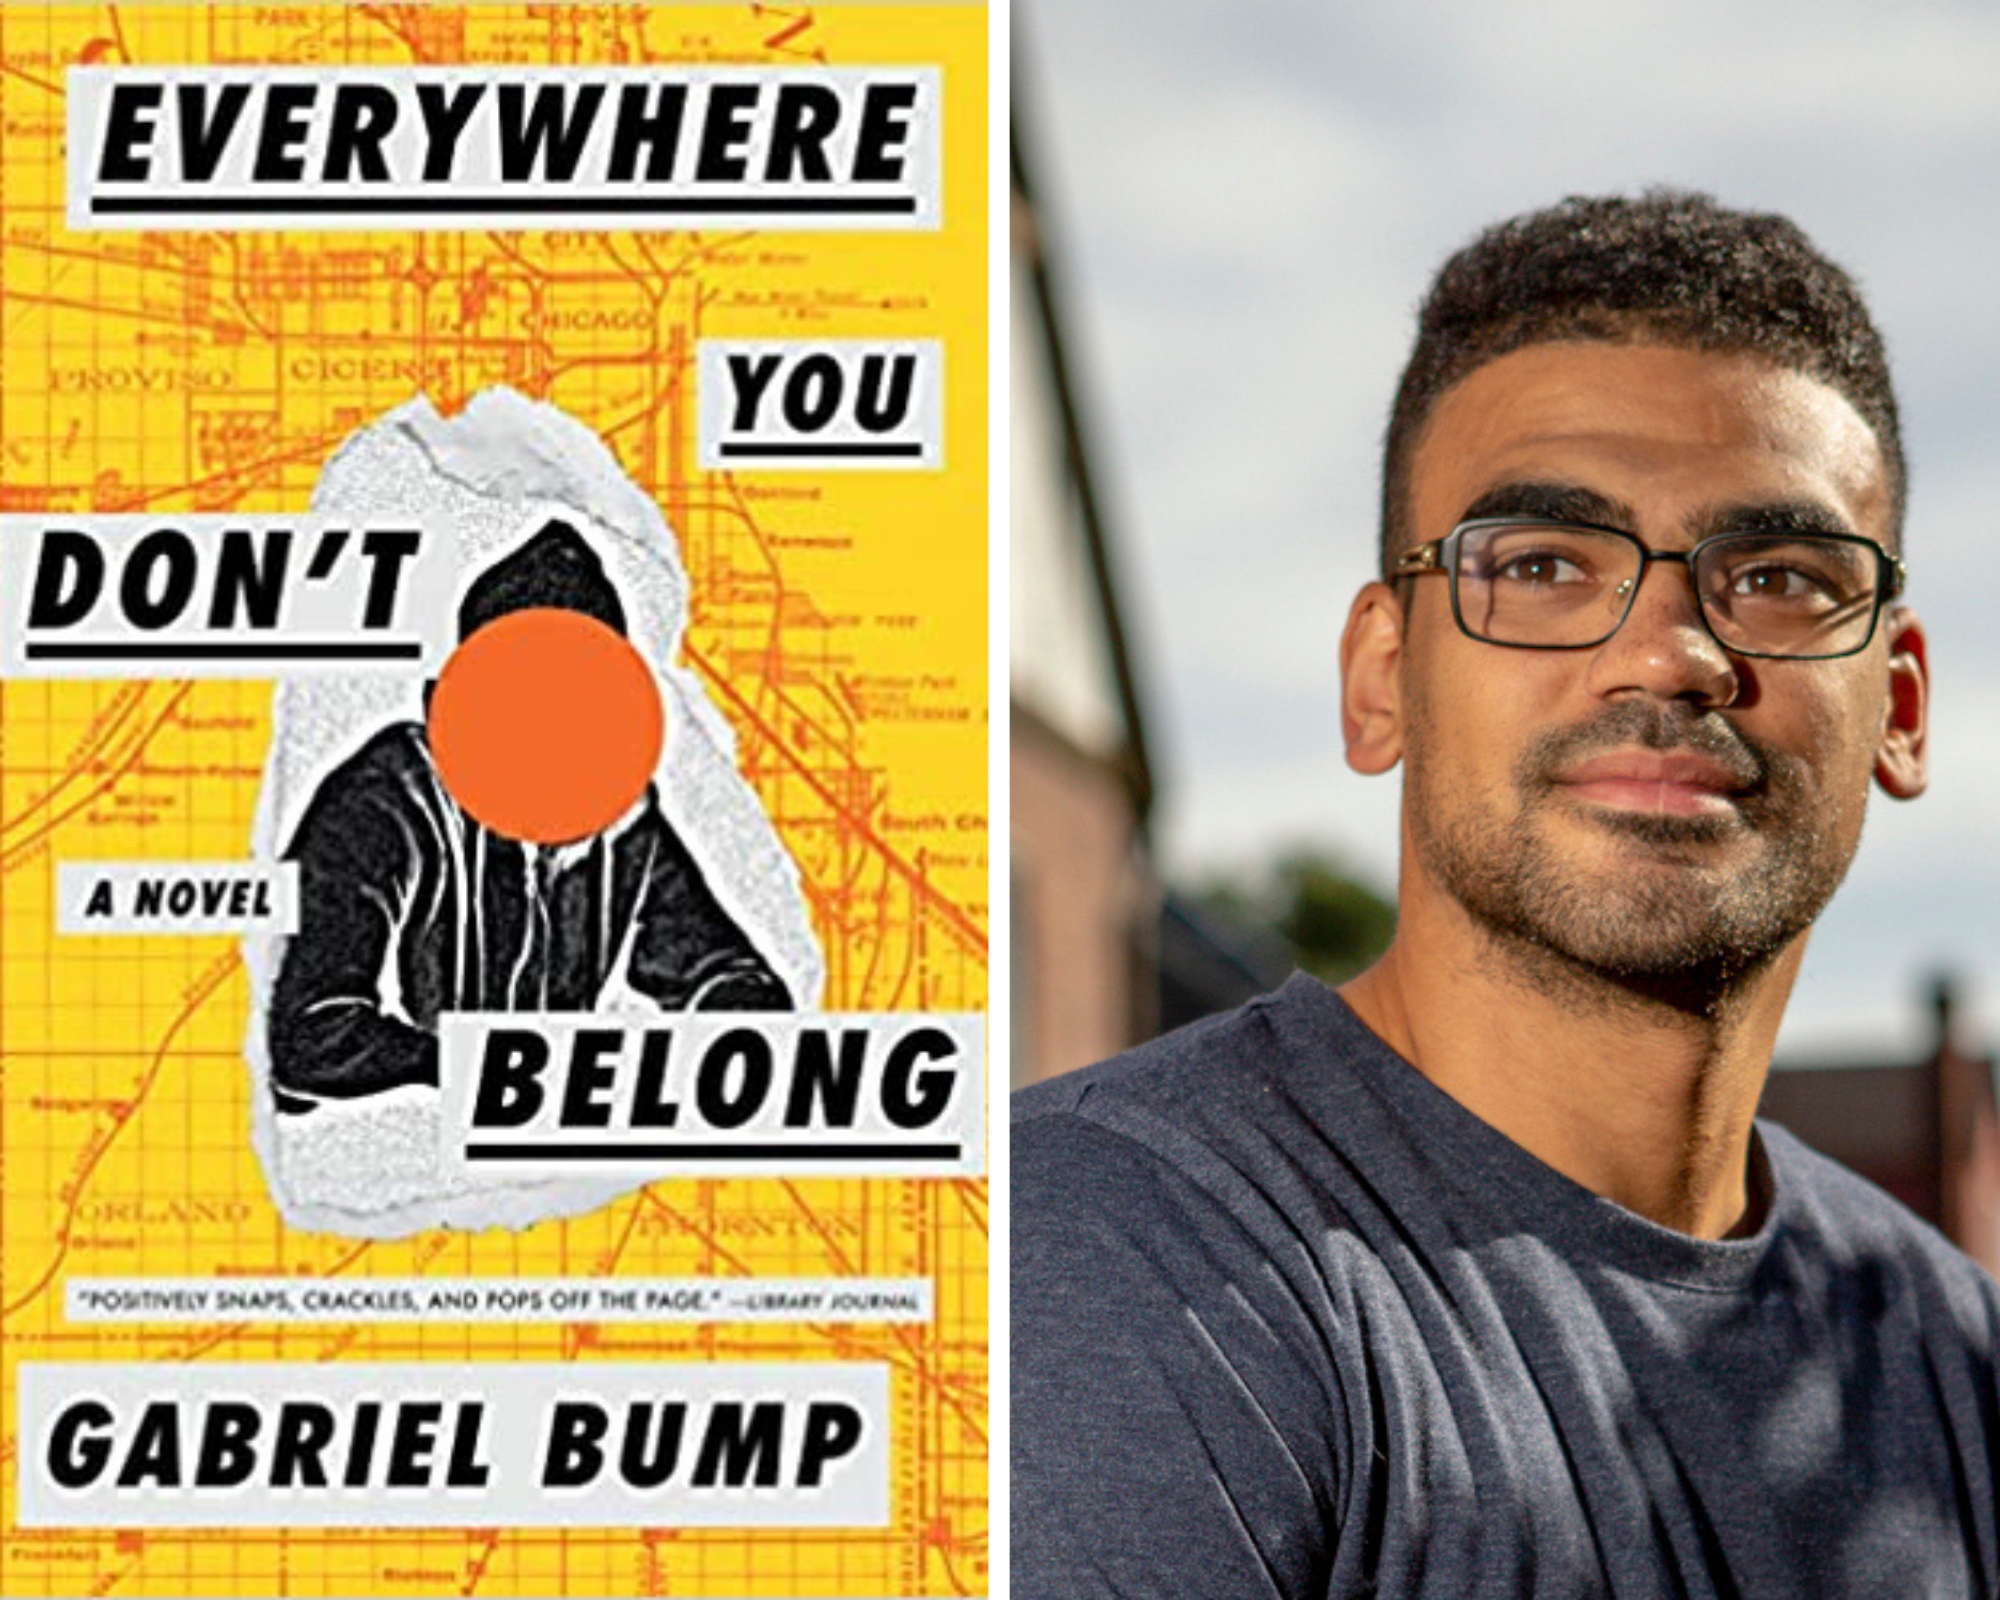 Left: book cover for "Everywhere you Don't Belong'; right: photo of Gabriel Bump the author